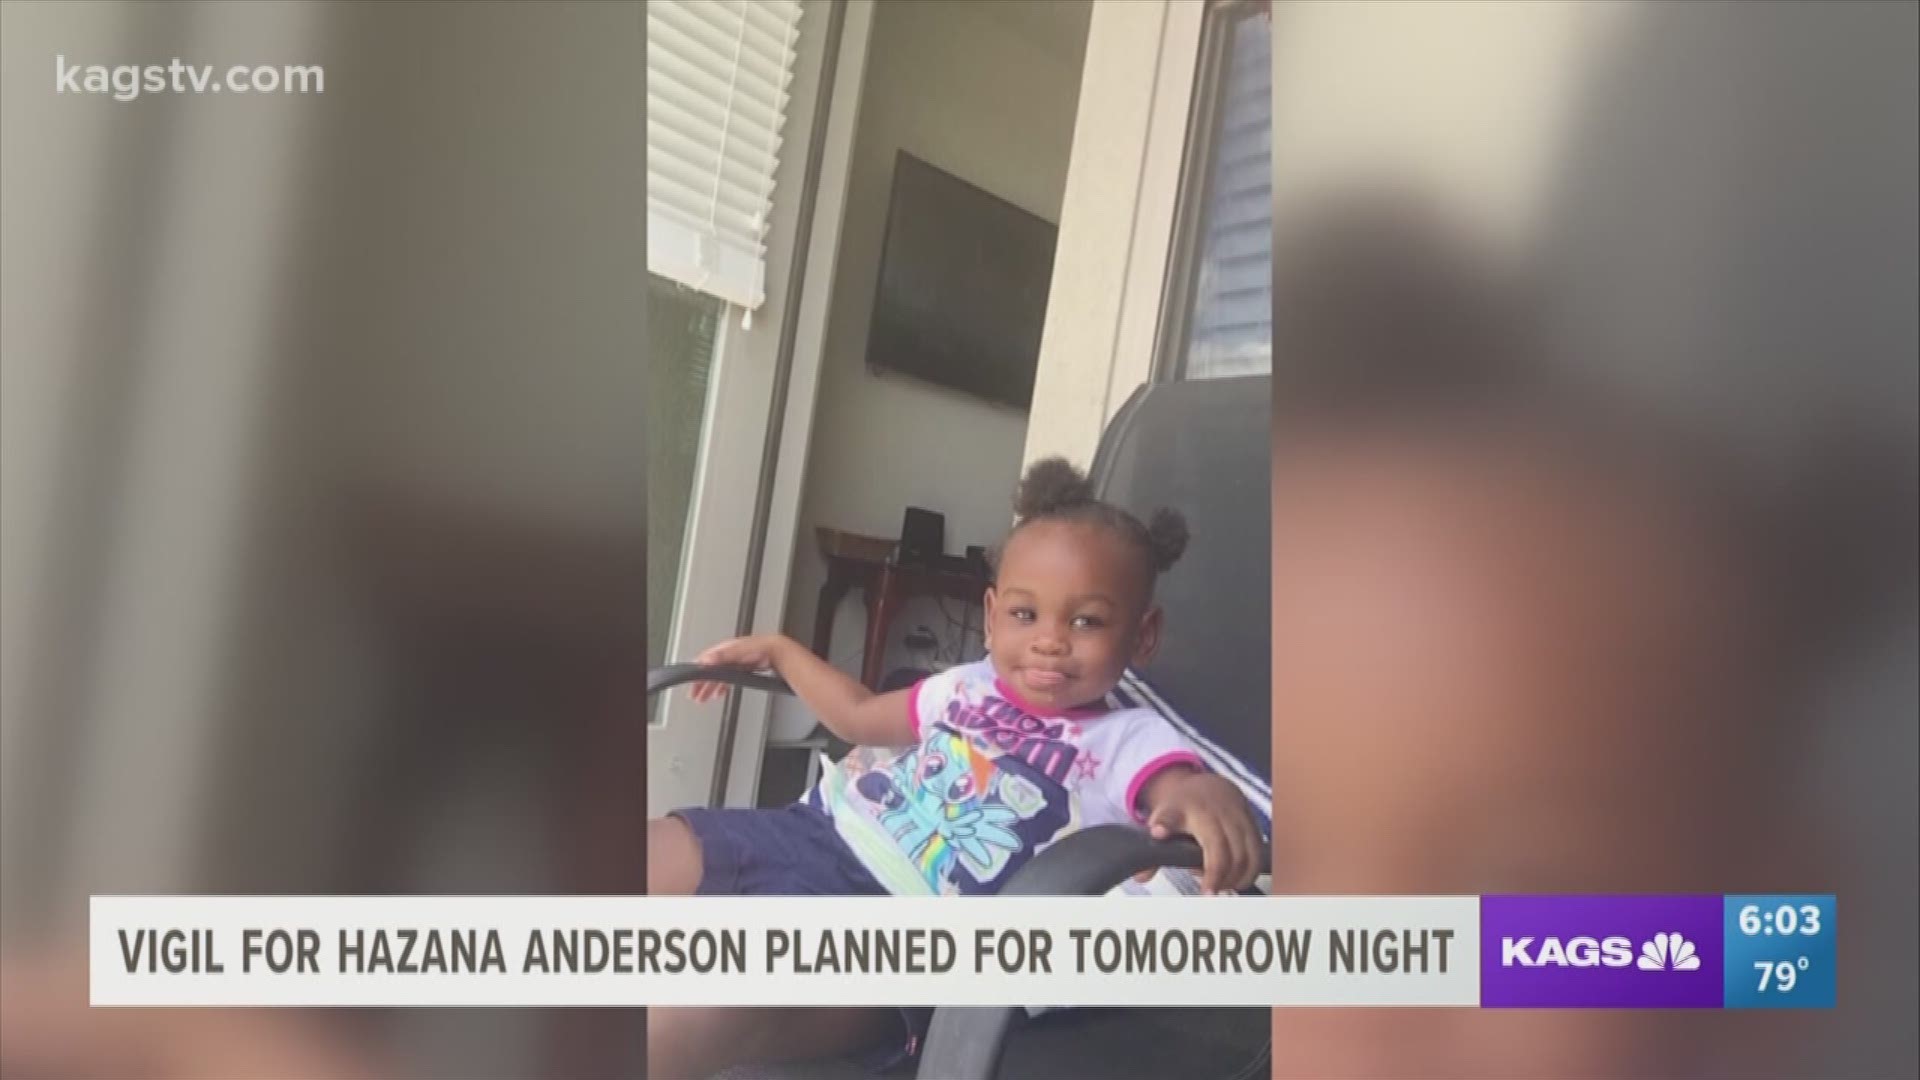 A vigil is now planned to honor the life Hazana Anderson at Gabbard Park in College Station starting at 6pm.